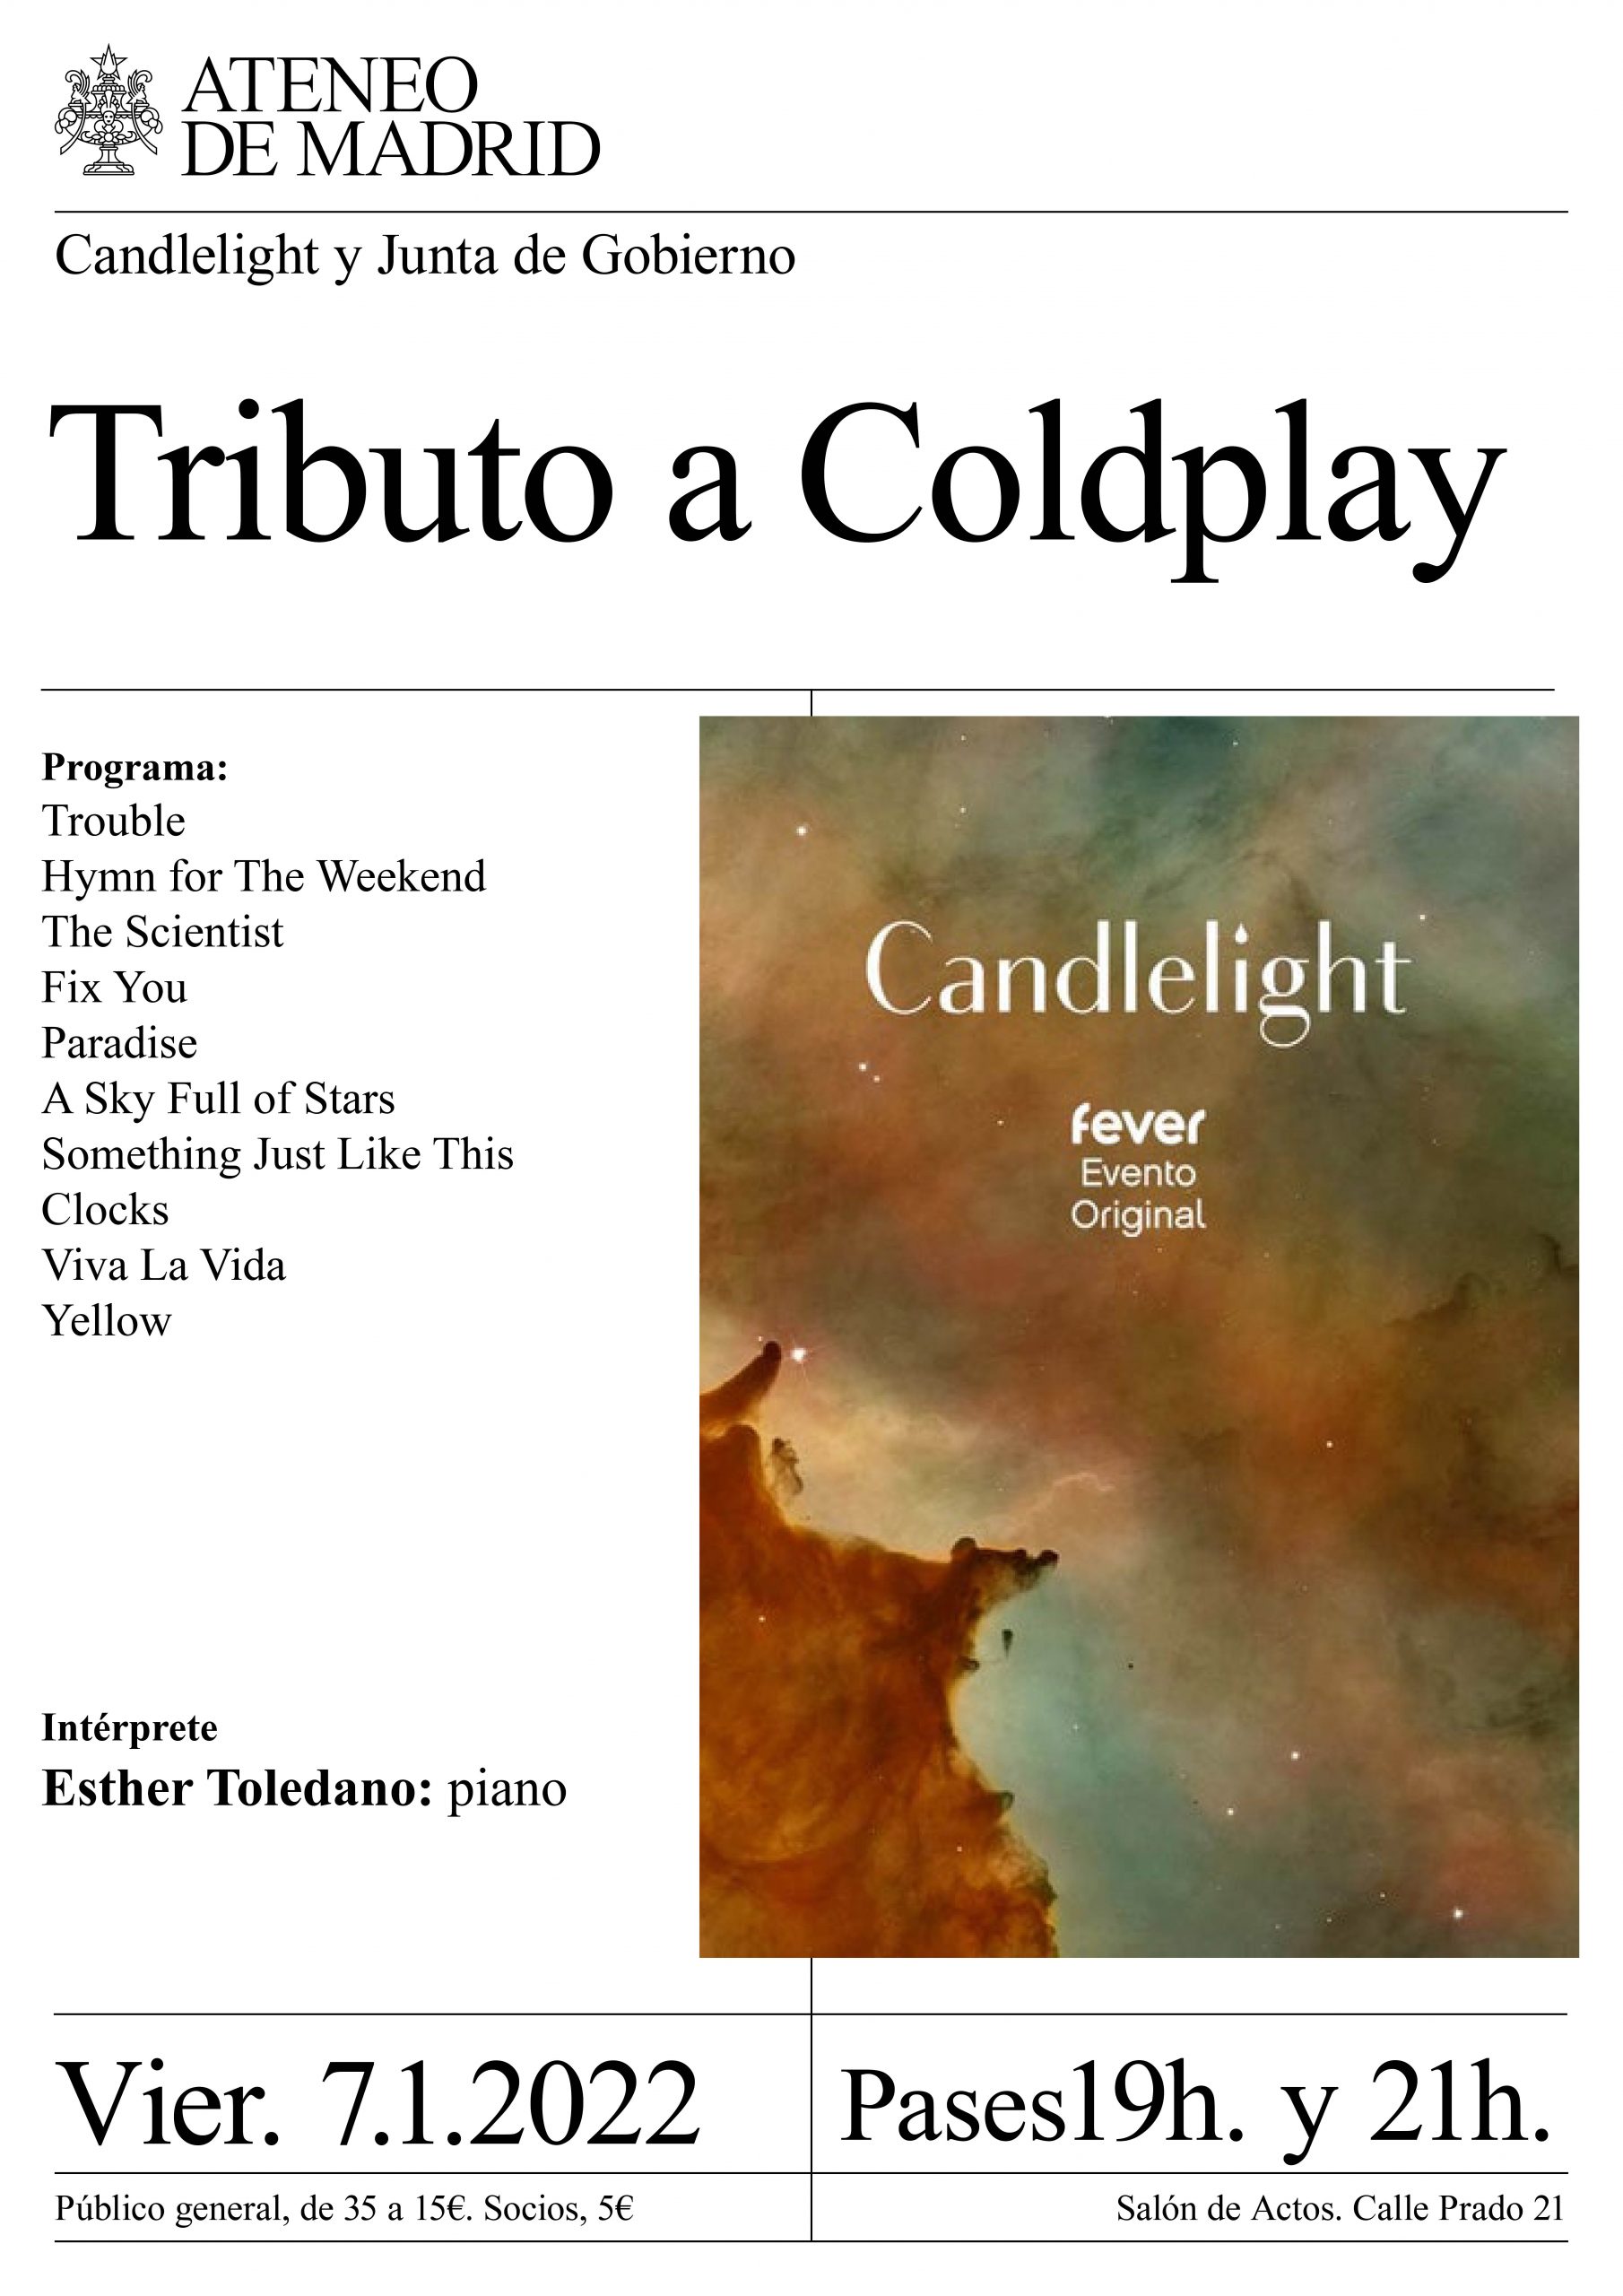 Candlelight: Tributo a Coldplay.